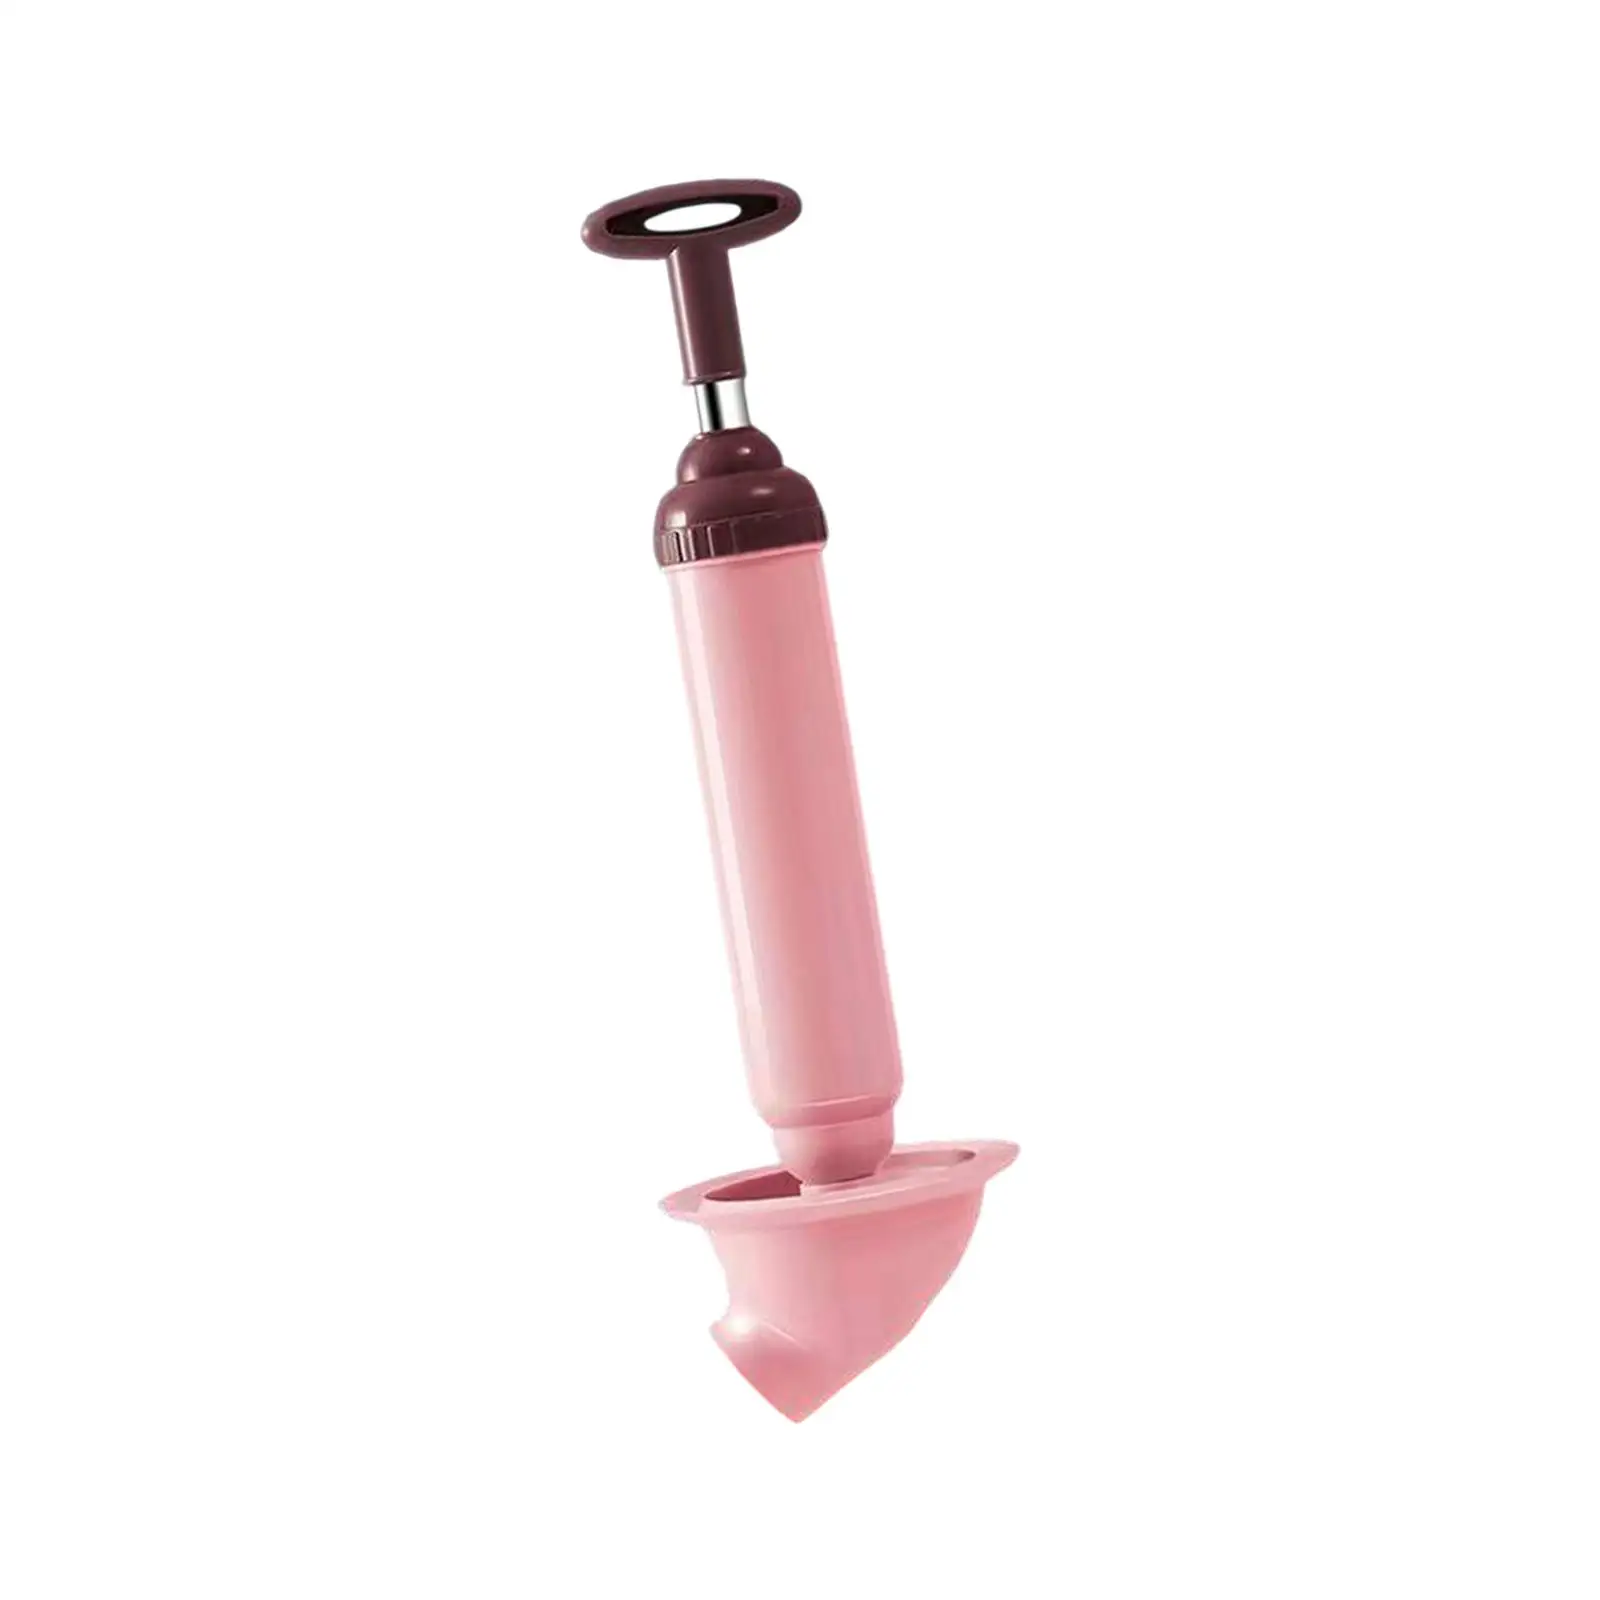 Toilet Plunger Accessories Strong Suction Pump High Pressure Drain Plunger for Sewer Dredging Plunger Bath Household Toilet Sink